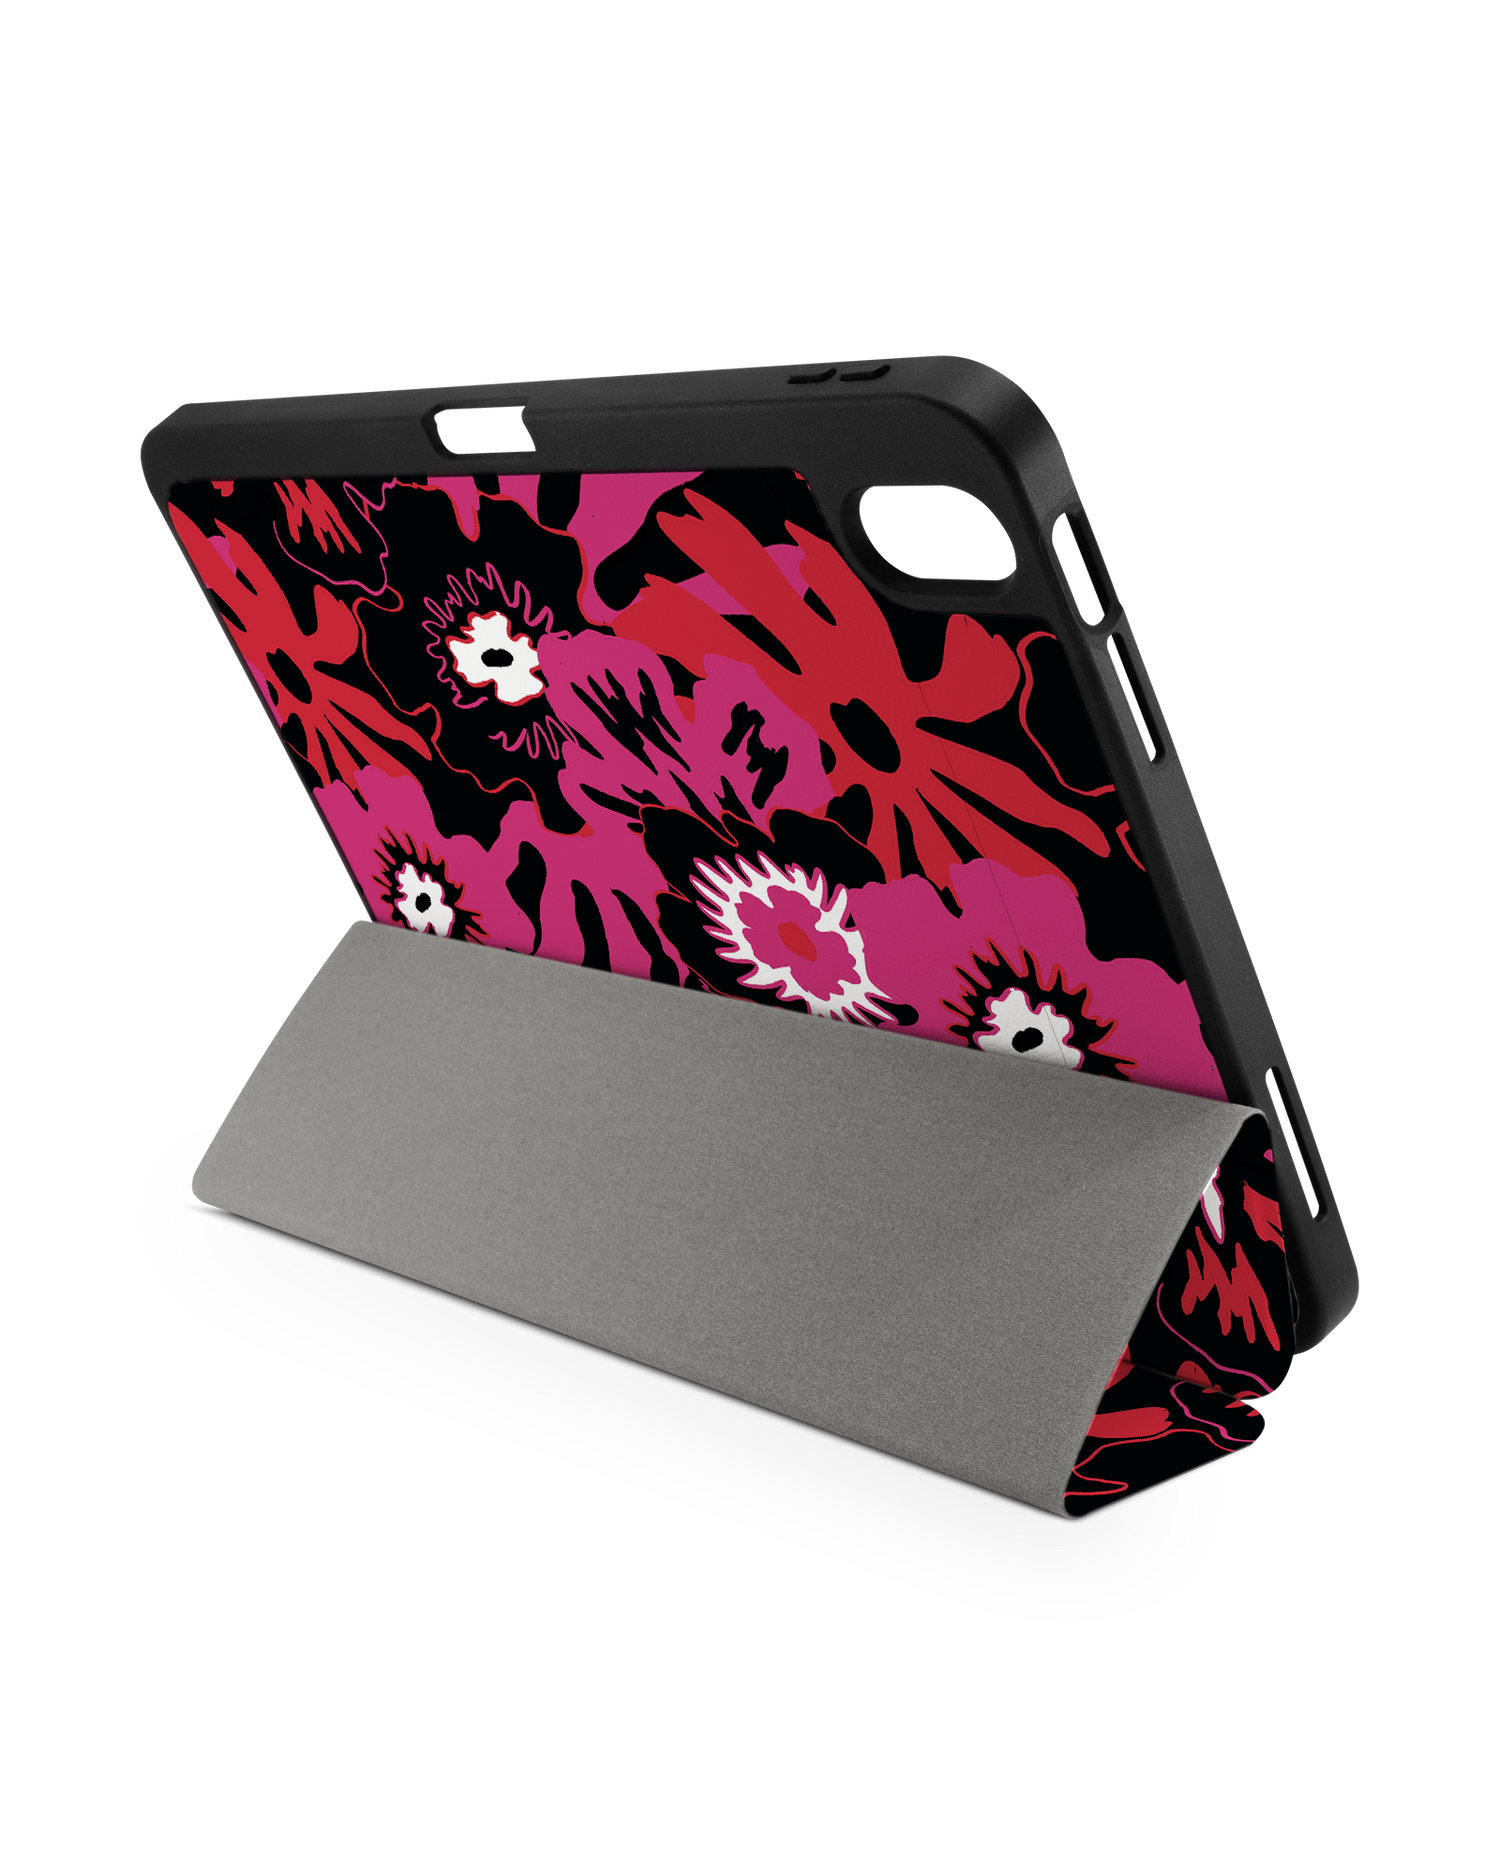 Flower Works iPad Case with Pencil Holder for Apple iPad (10th Generation): Set up in landscape format (back view)